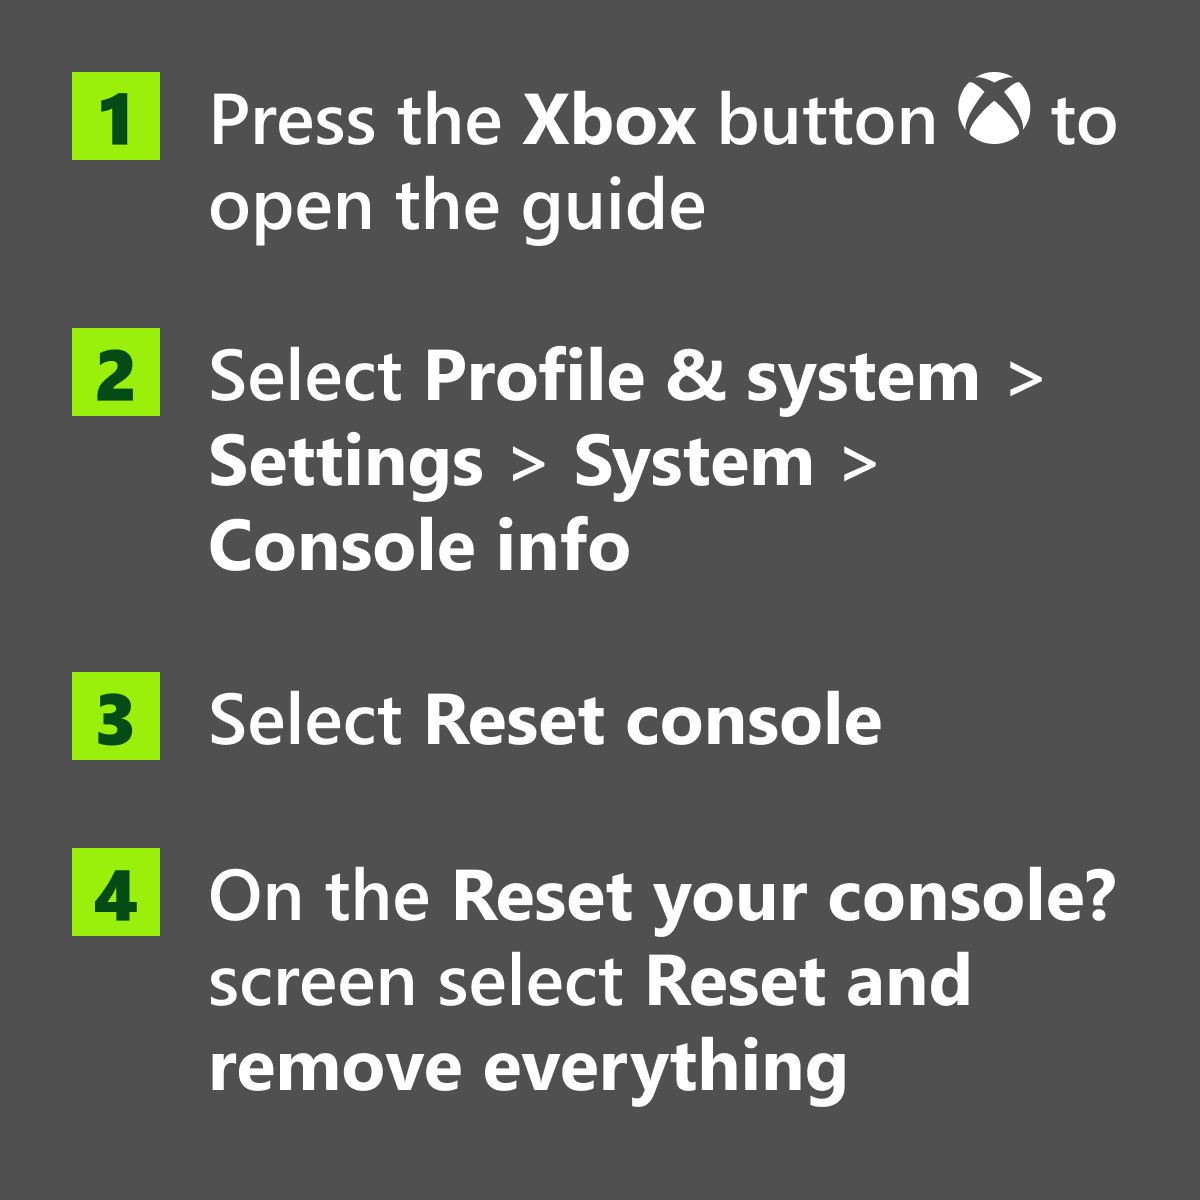 Select "System"
Select "Console Info"